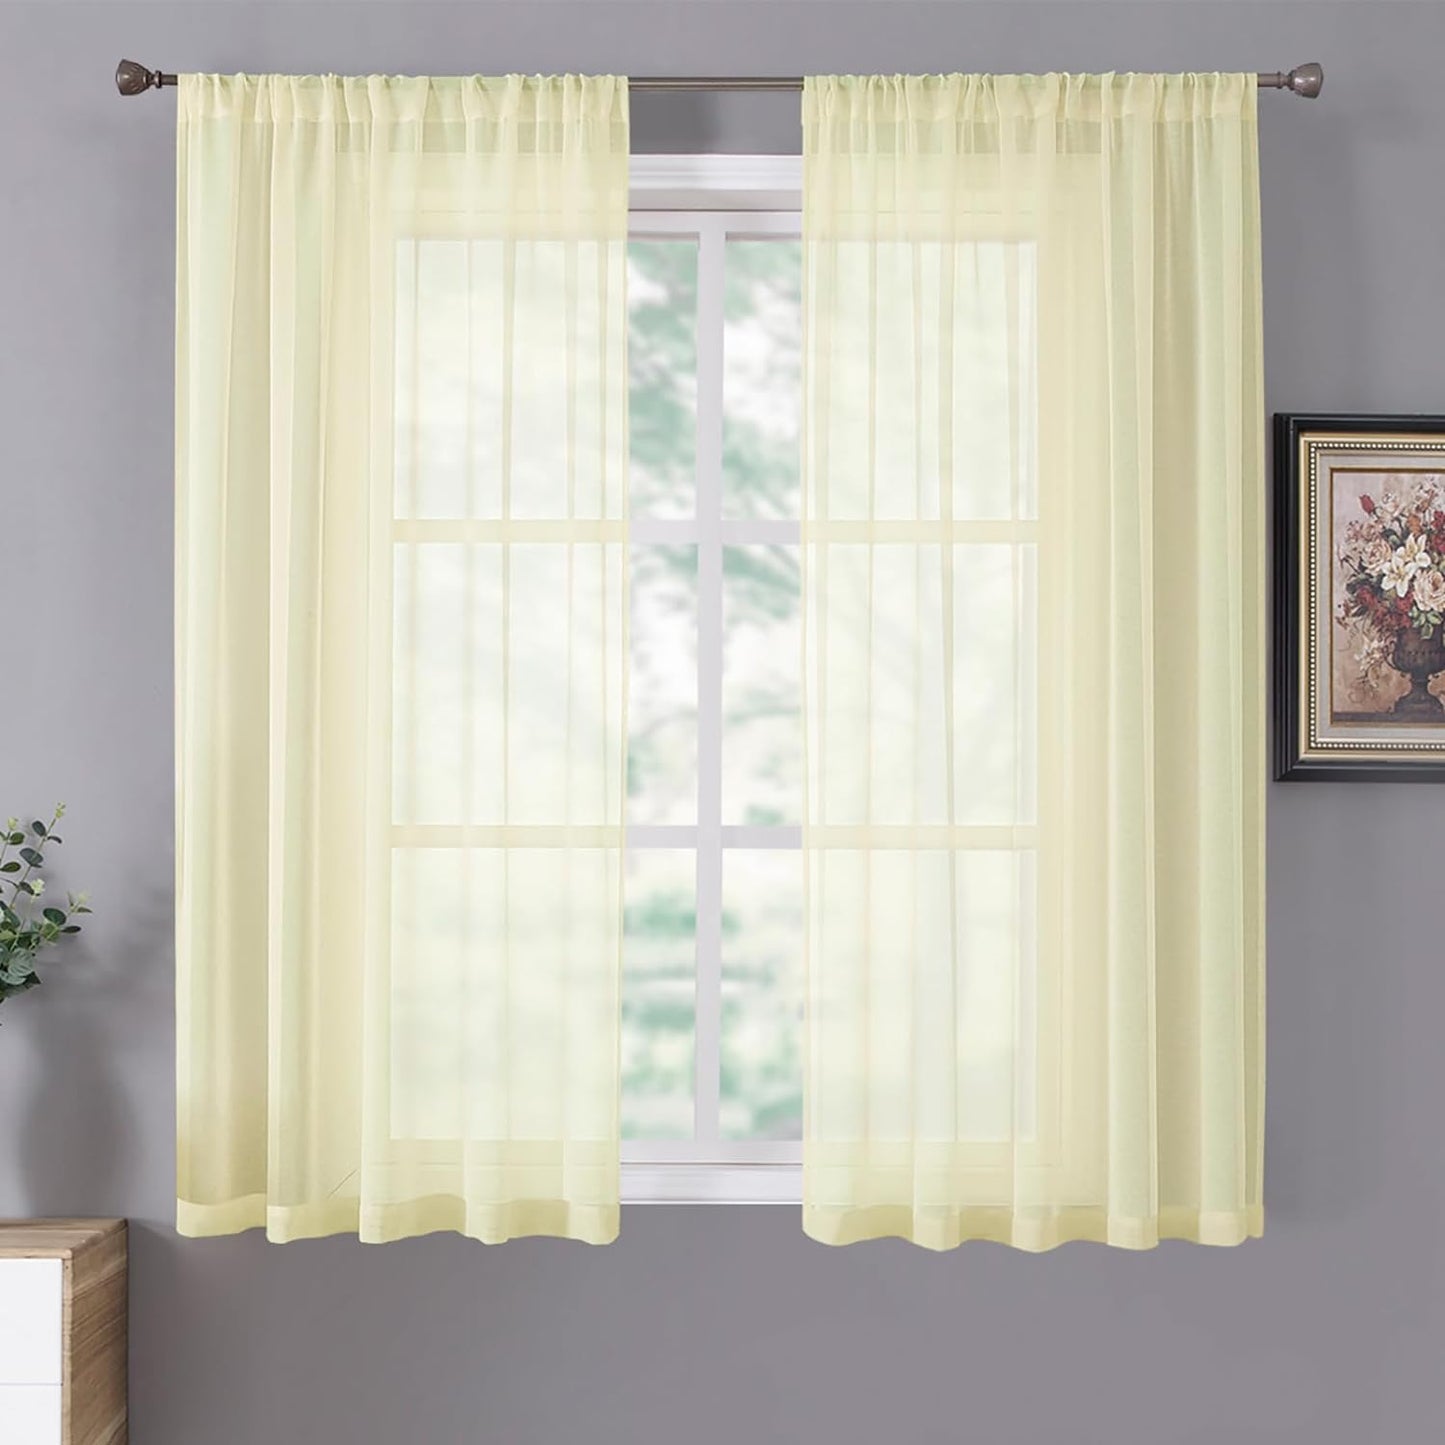 Tollpiz Short Sheer Curtains Linen Textured Bedroom Curtain Sheers Light Filtering Rod Pocket Voile Curtains for Living Room, 54 X 45 Inches Long, White, Set of 2 Panels  Tollpiz Tex Transparent Yellow 54"W X 45"L 